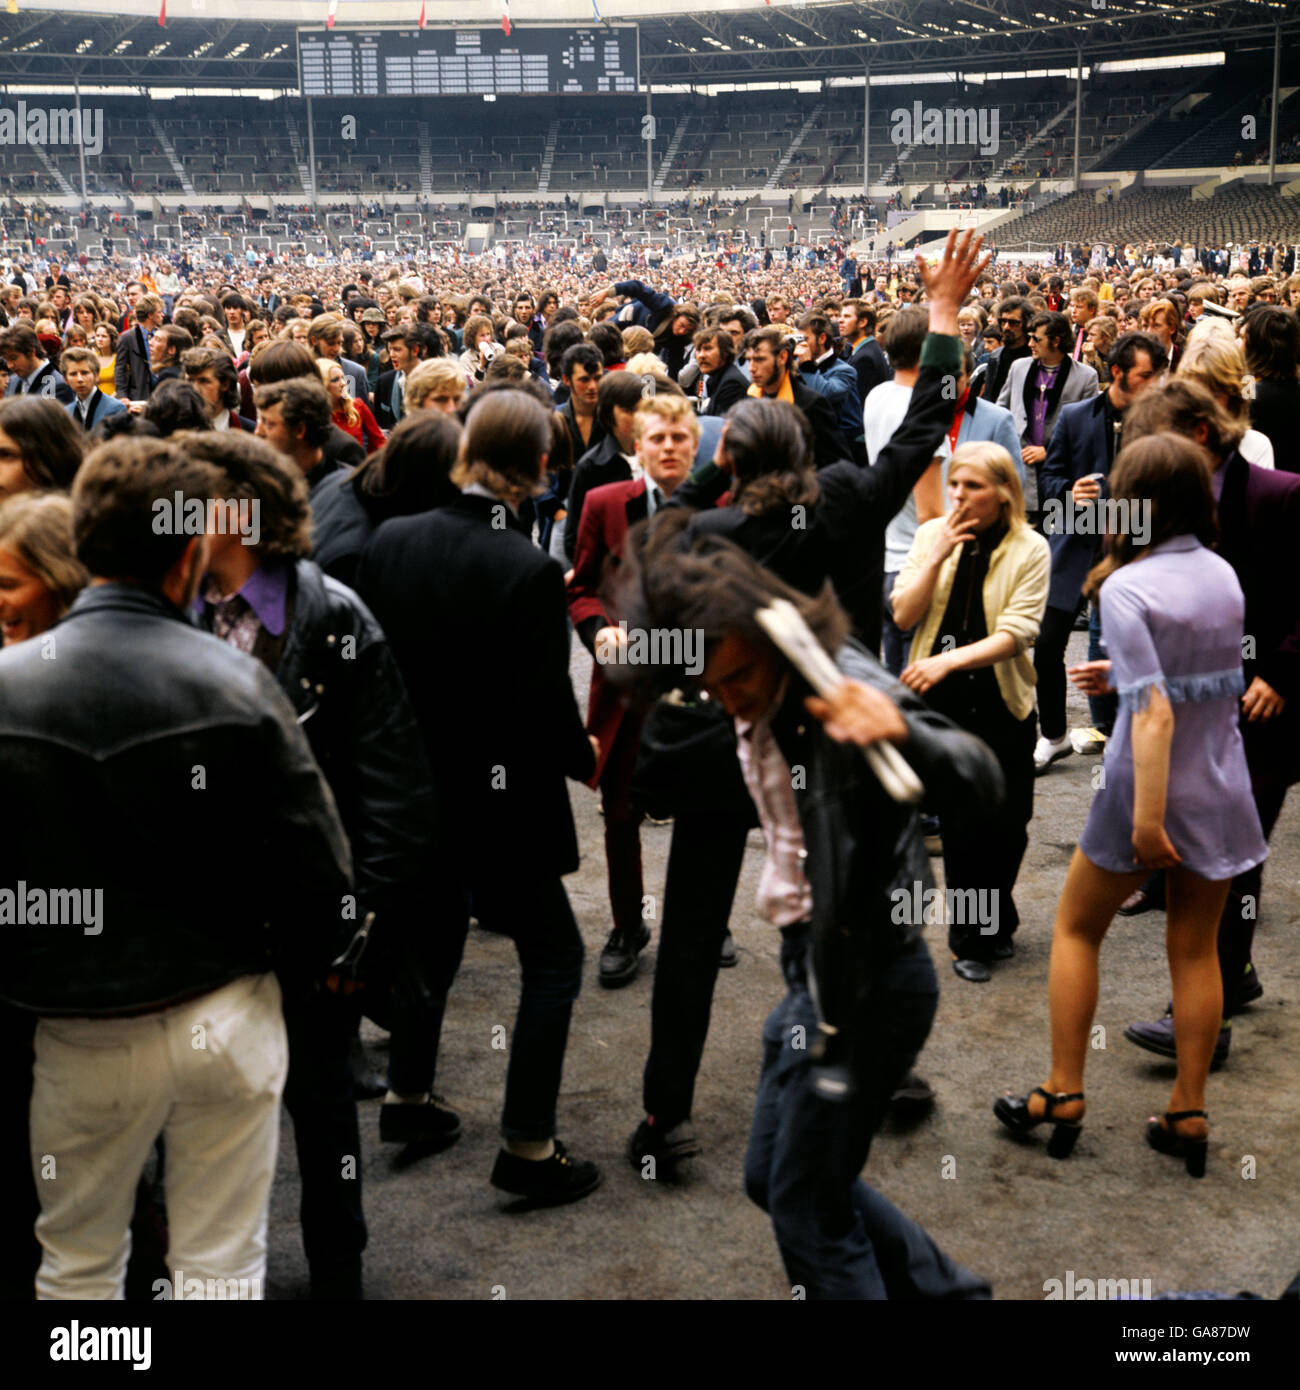 Some of the thousands of rock fans are seen at the Rock 'n' Roll festival at Wembley Stadium wearing fashions of the fifties. Stock Photo